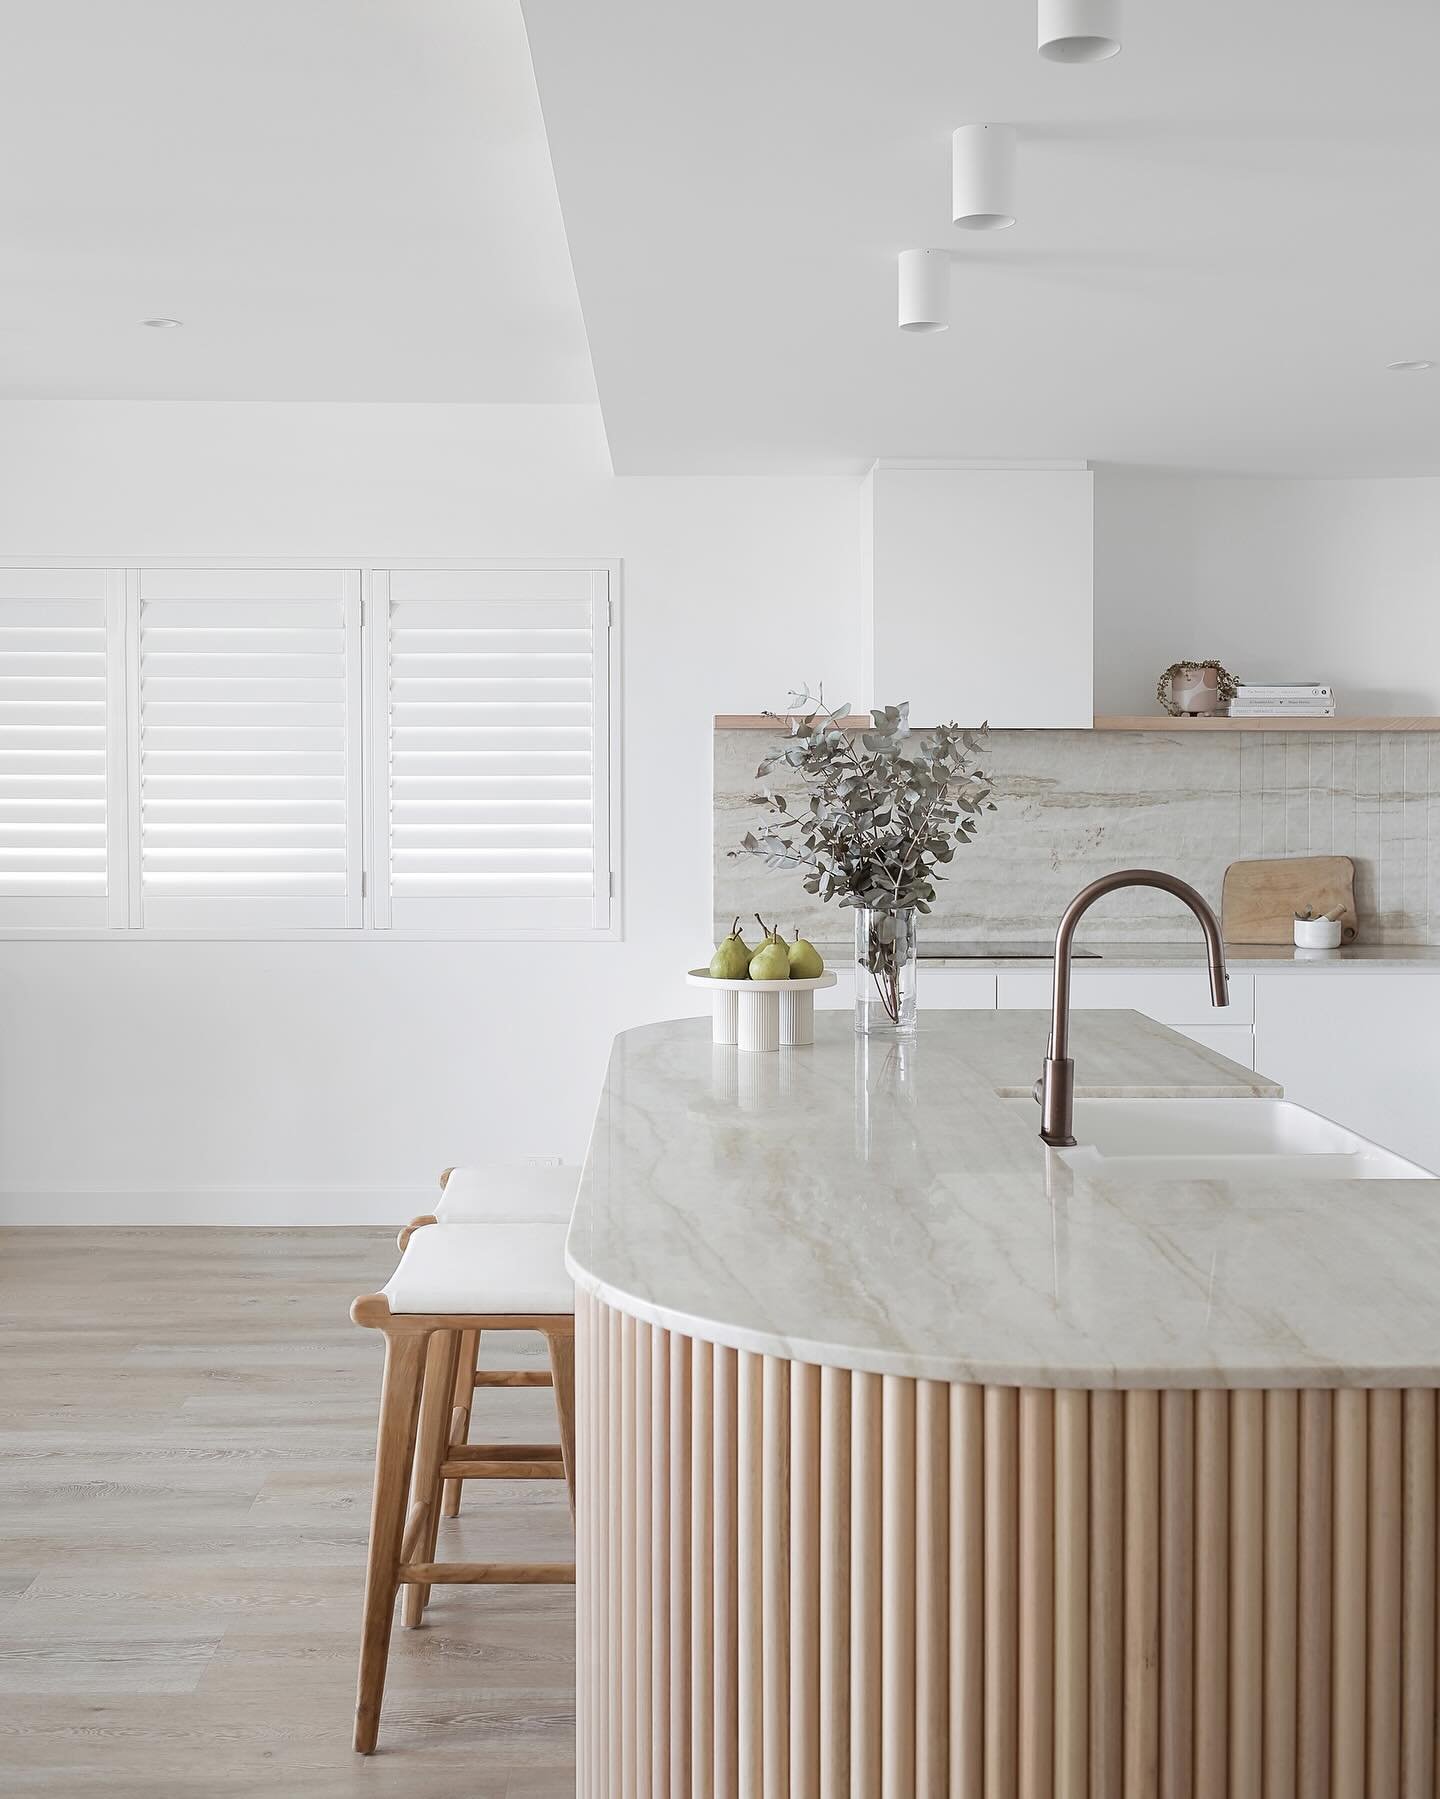 Taking it back to 2021 this kitchen is still absolutely what dreams are made of. 

Curves and natural finishes overlooking the ocean. We couldn&rsquo;t have asked for a better team on this one! 

@katecooperinteriors 
@blackwoodcollective 
&bull;
&bu